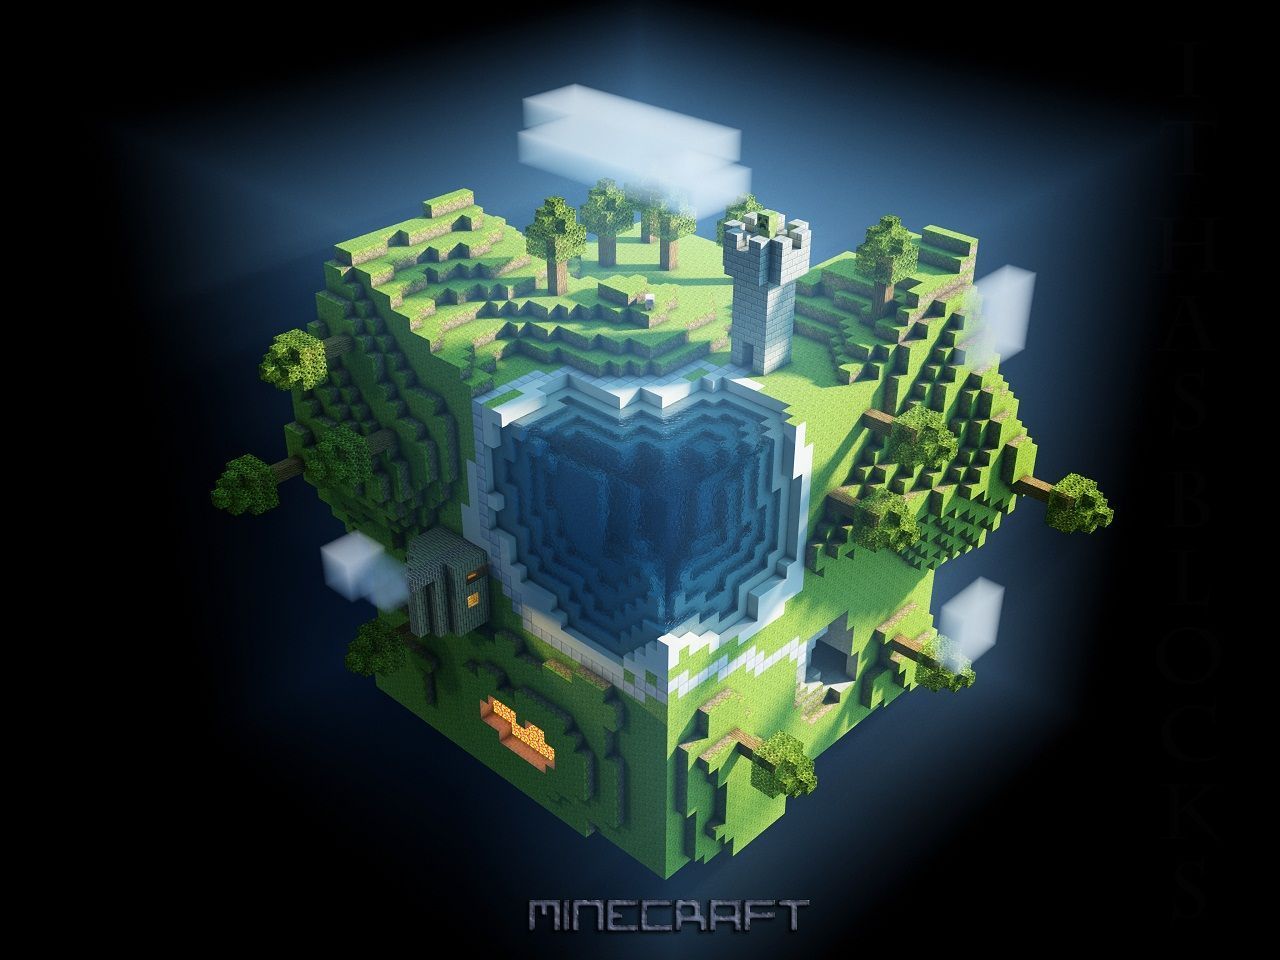 35 Awesome Minecraft wallpapers in HD | #1 Design Utopia Trend